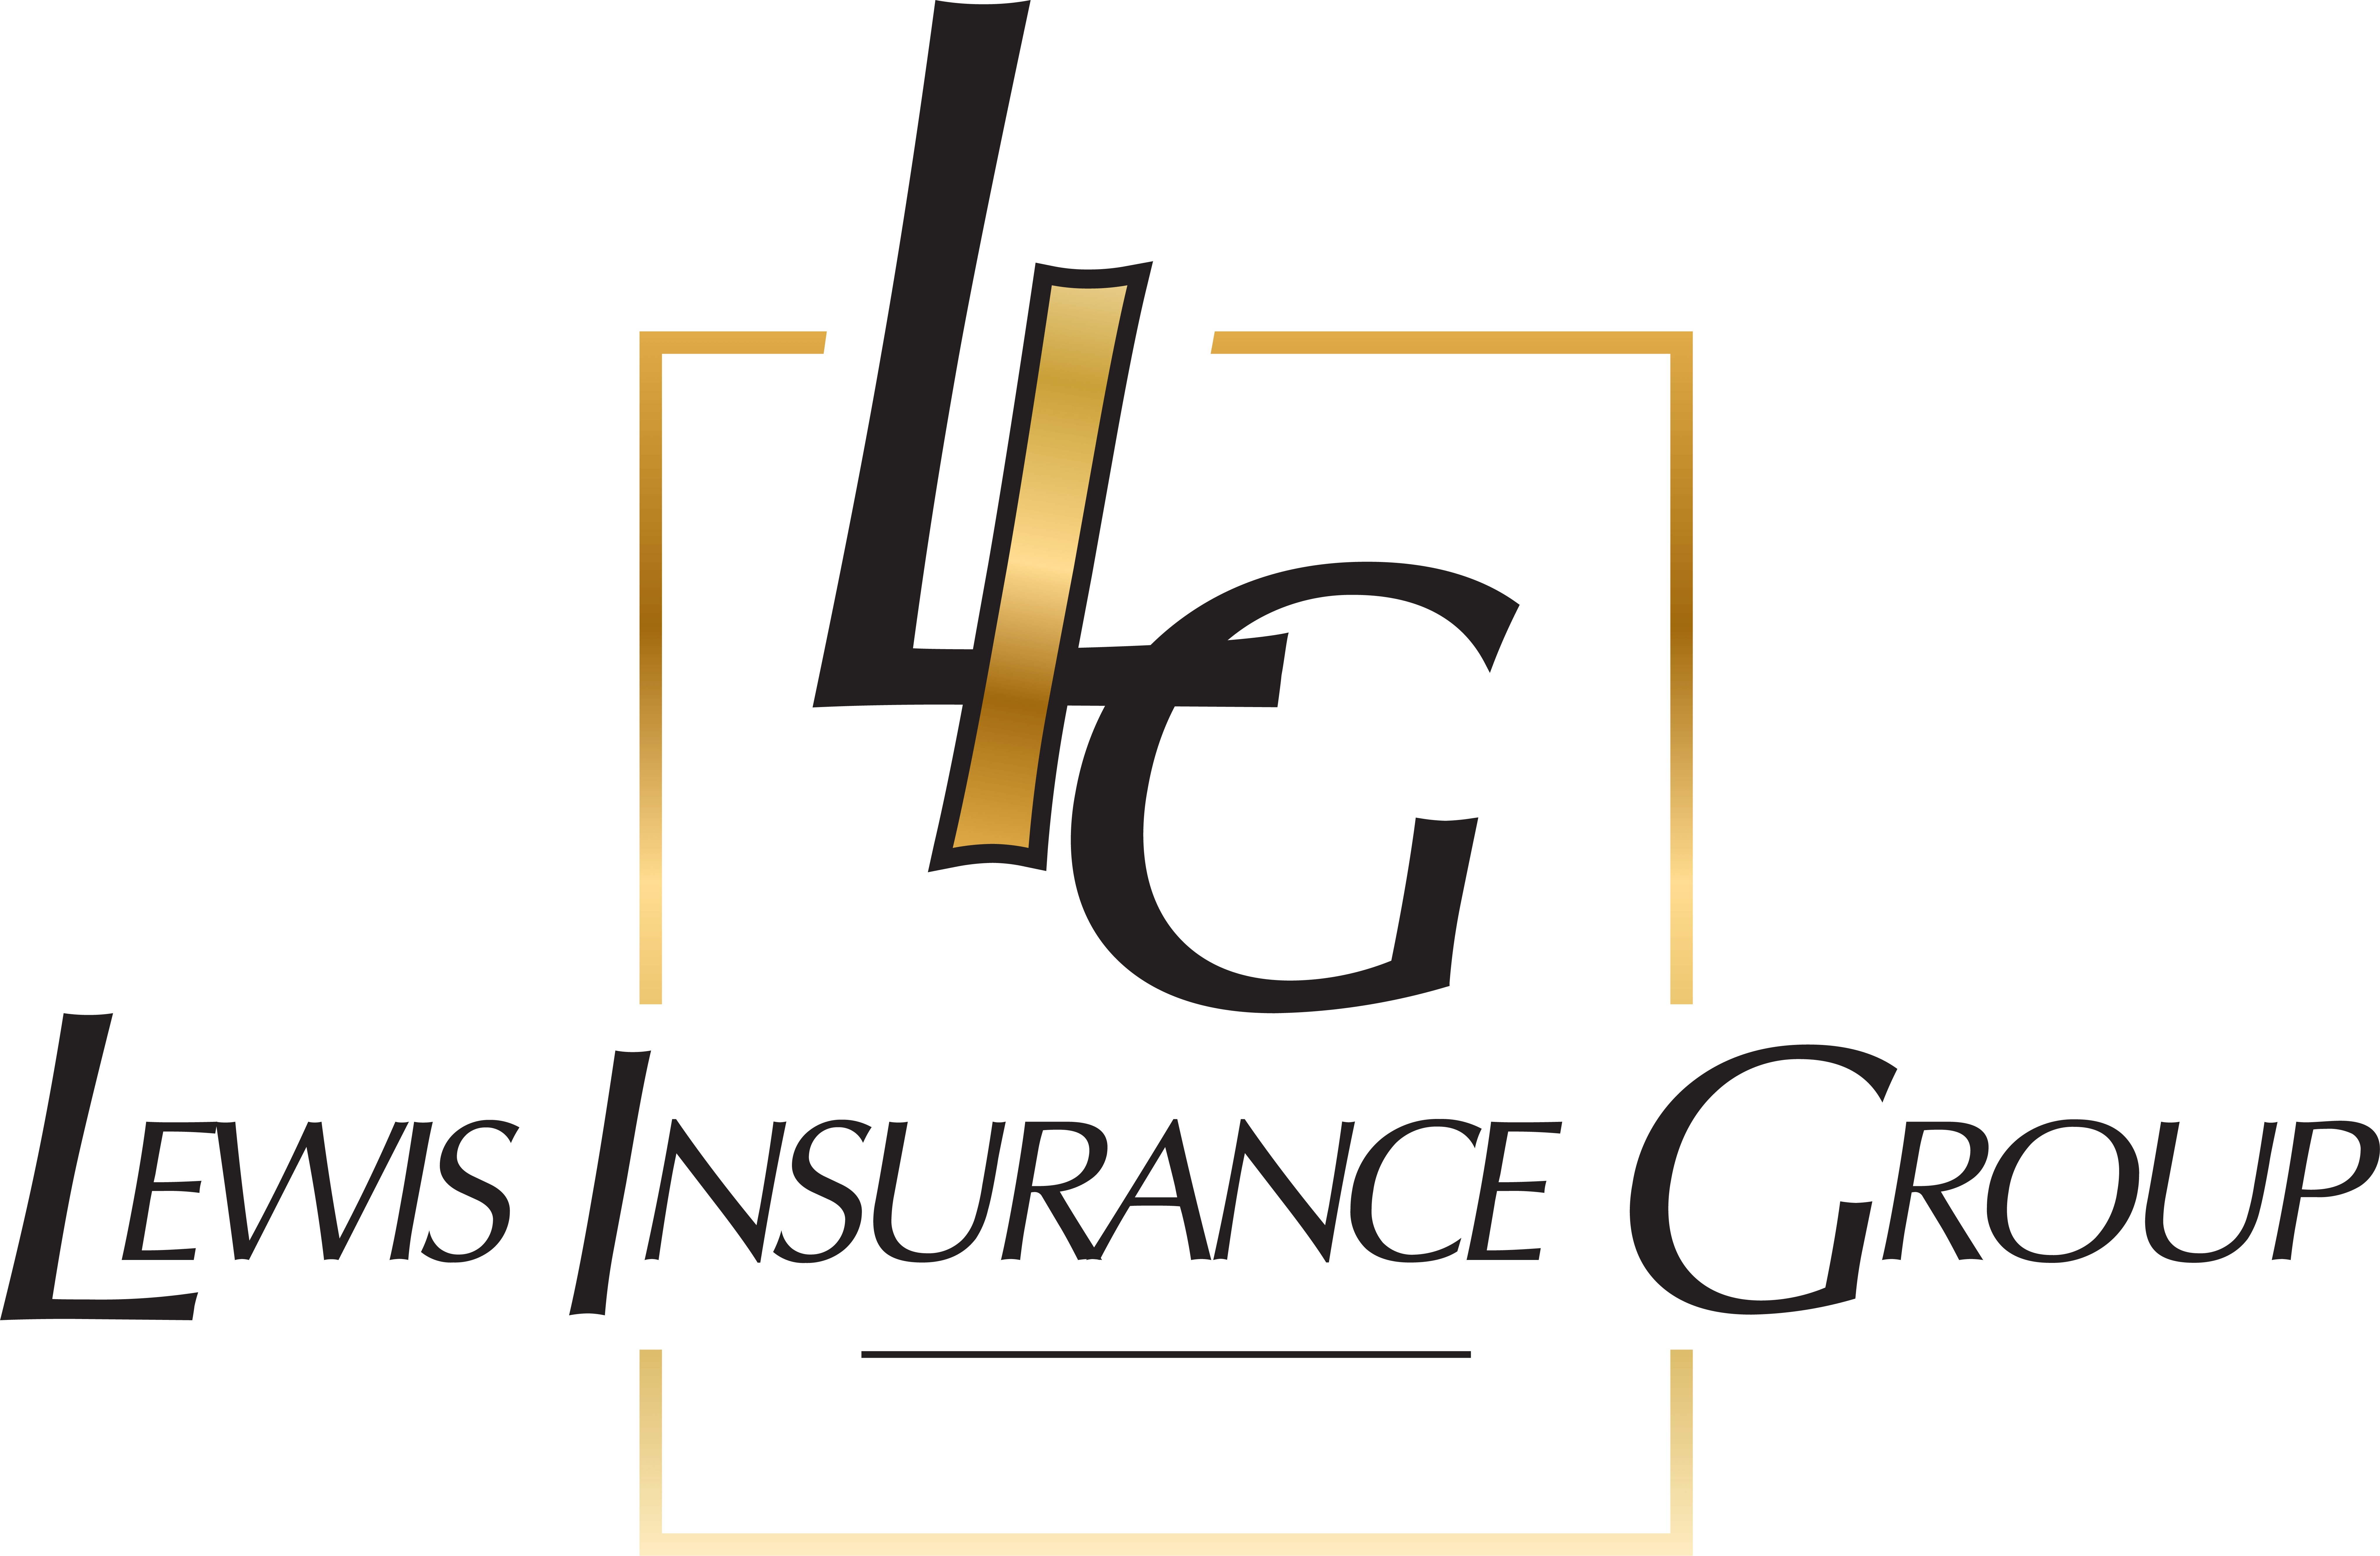 Lewis Insurance Group